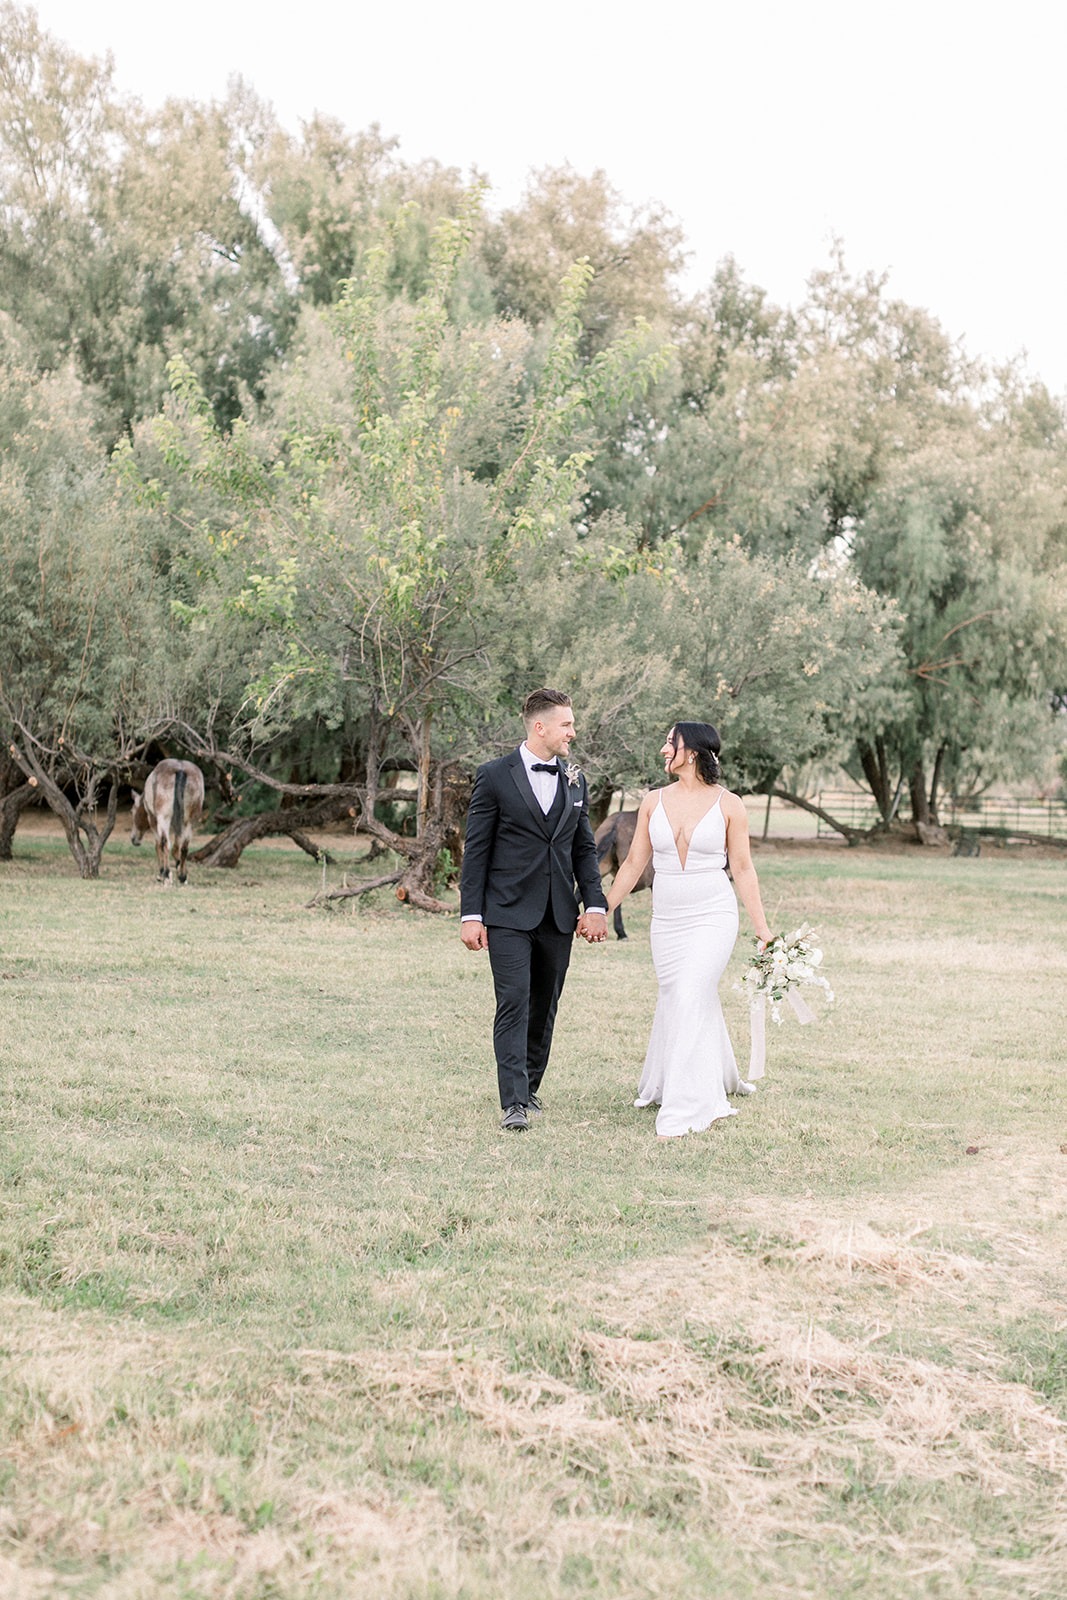 The meadows | Open Pasture Wedding Location | Outdoor Events Las Vegas | Greengale Farms